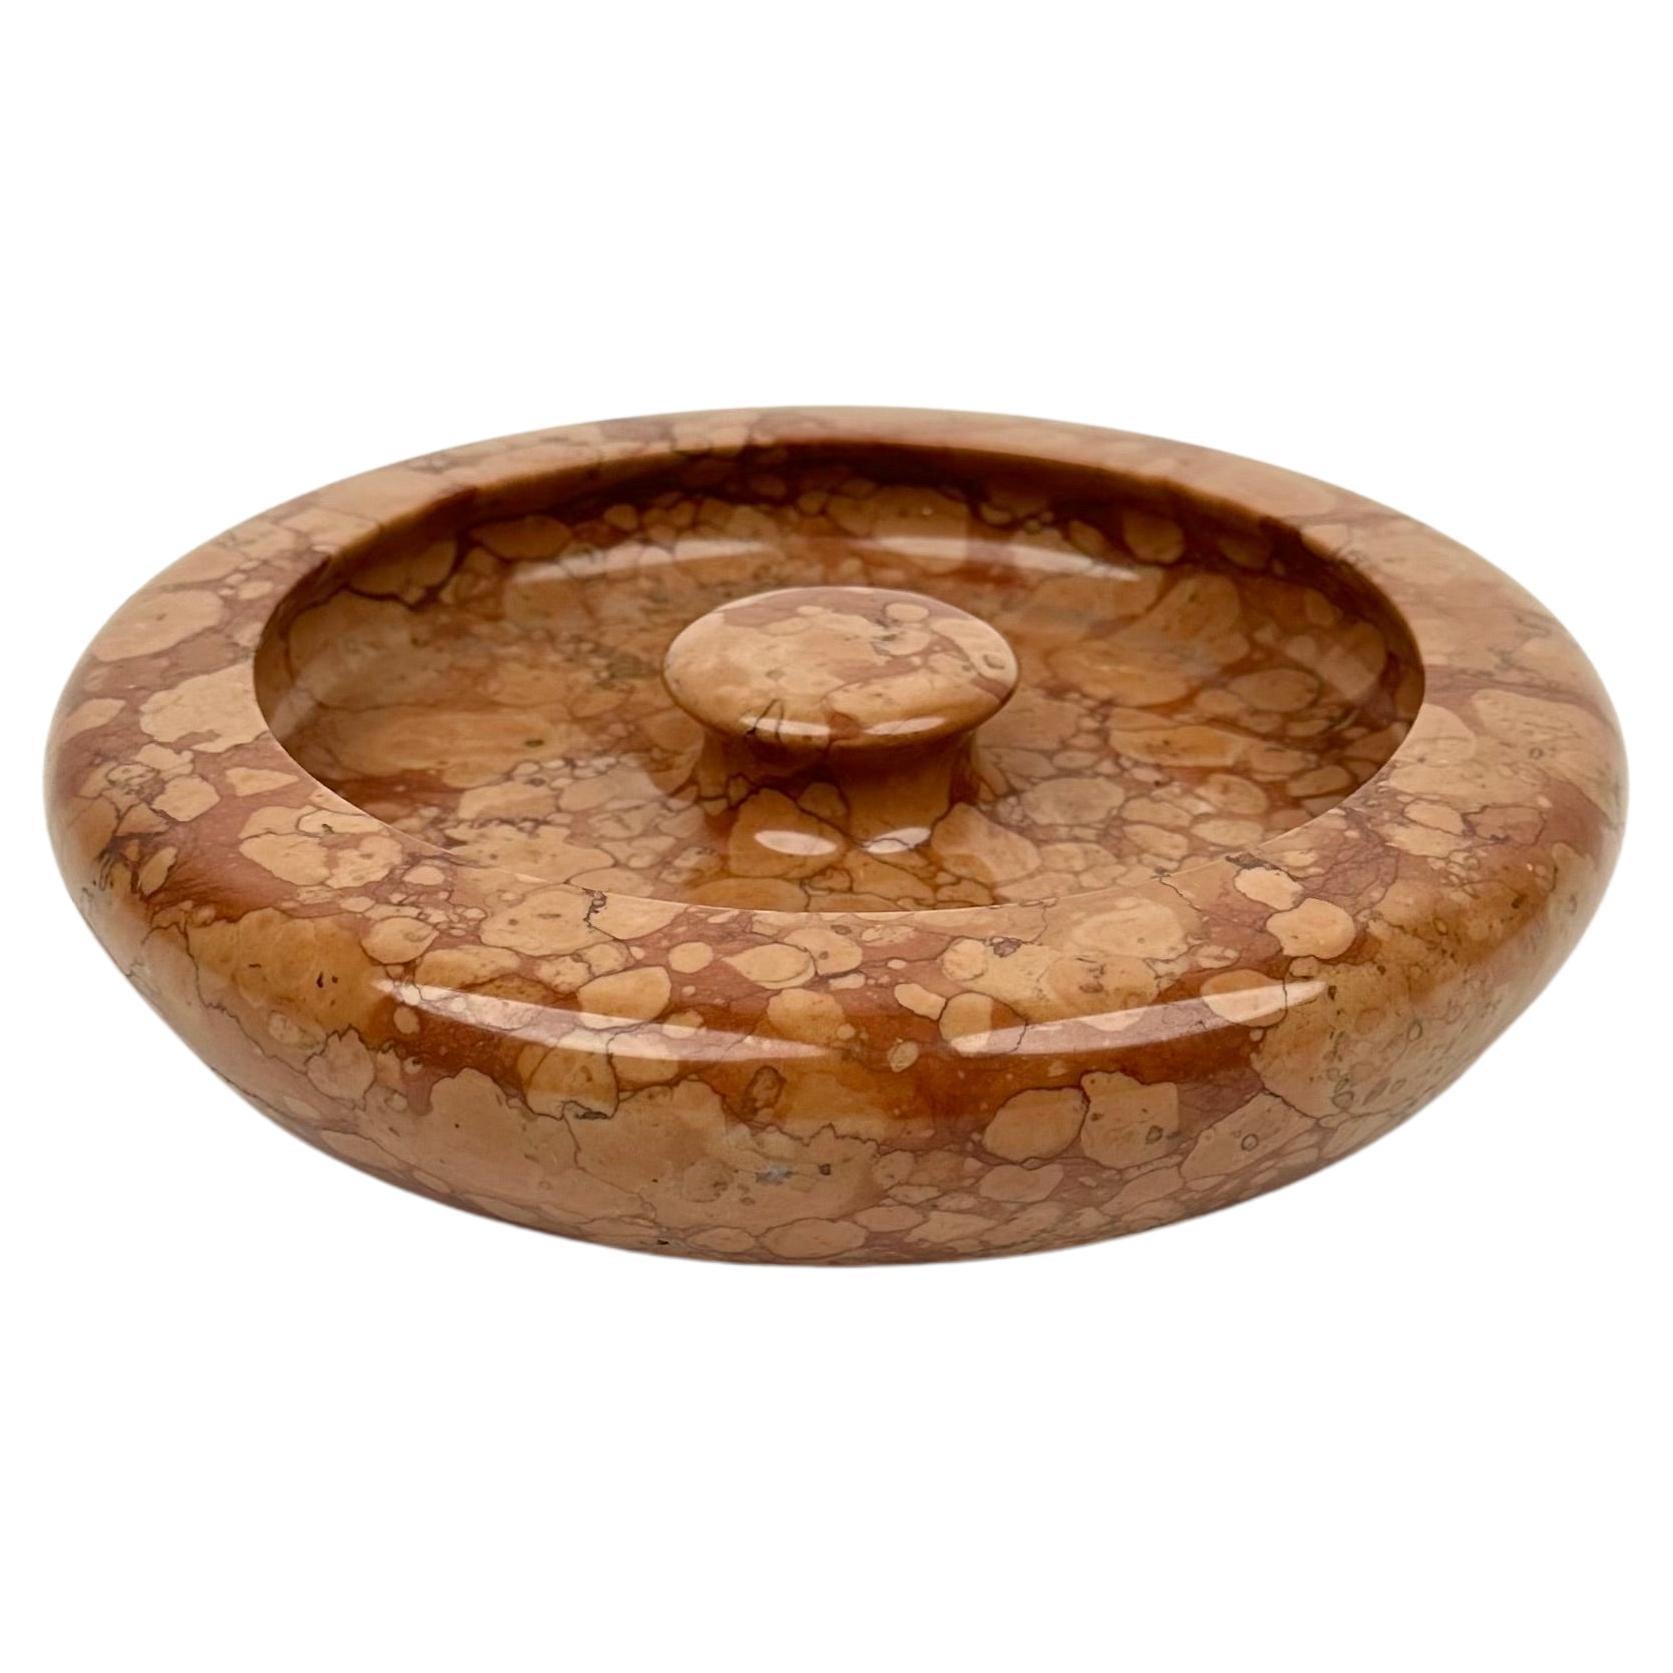 Round marble ashtray or vide-poche attributed to Angelo Mangiarotti for Knoll.

Made in Italy in the 1960s.
